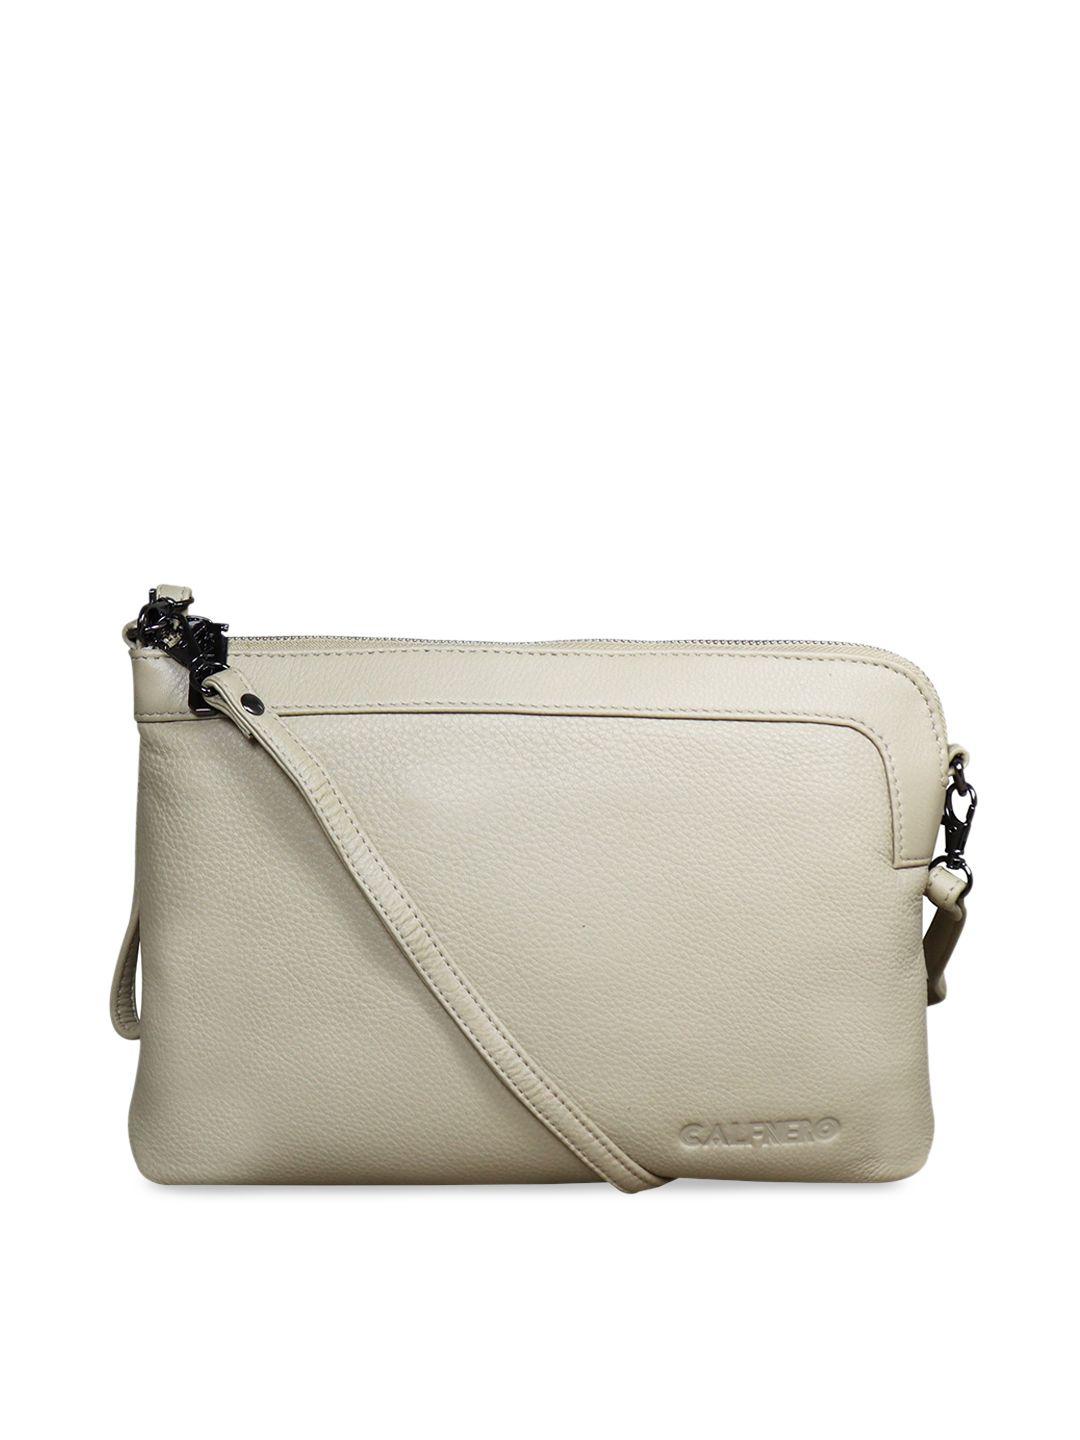 calfnero cream-coloured textured leather structured sling bag